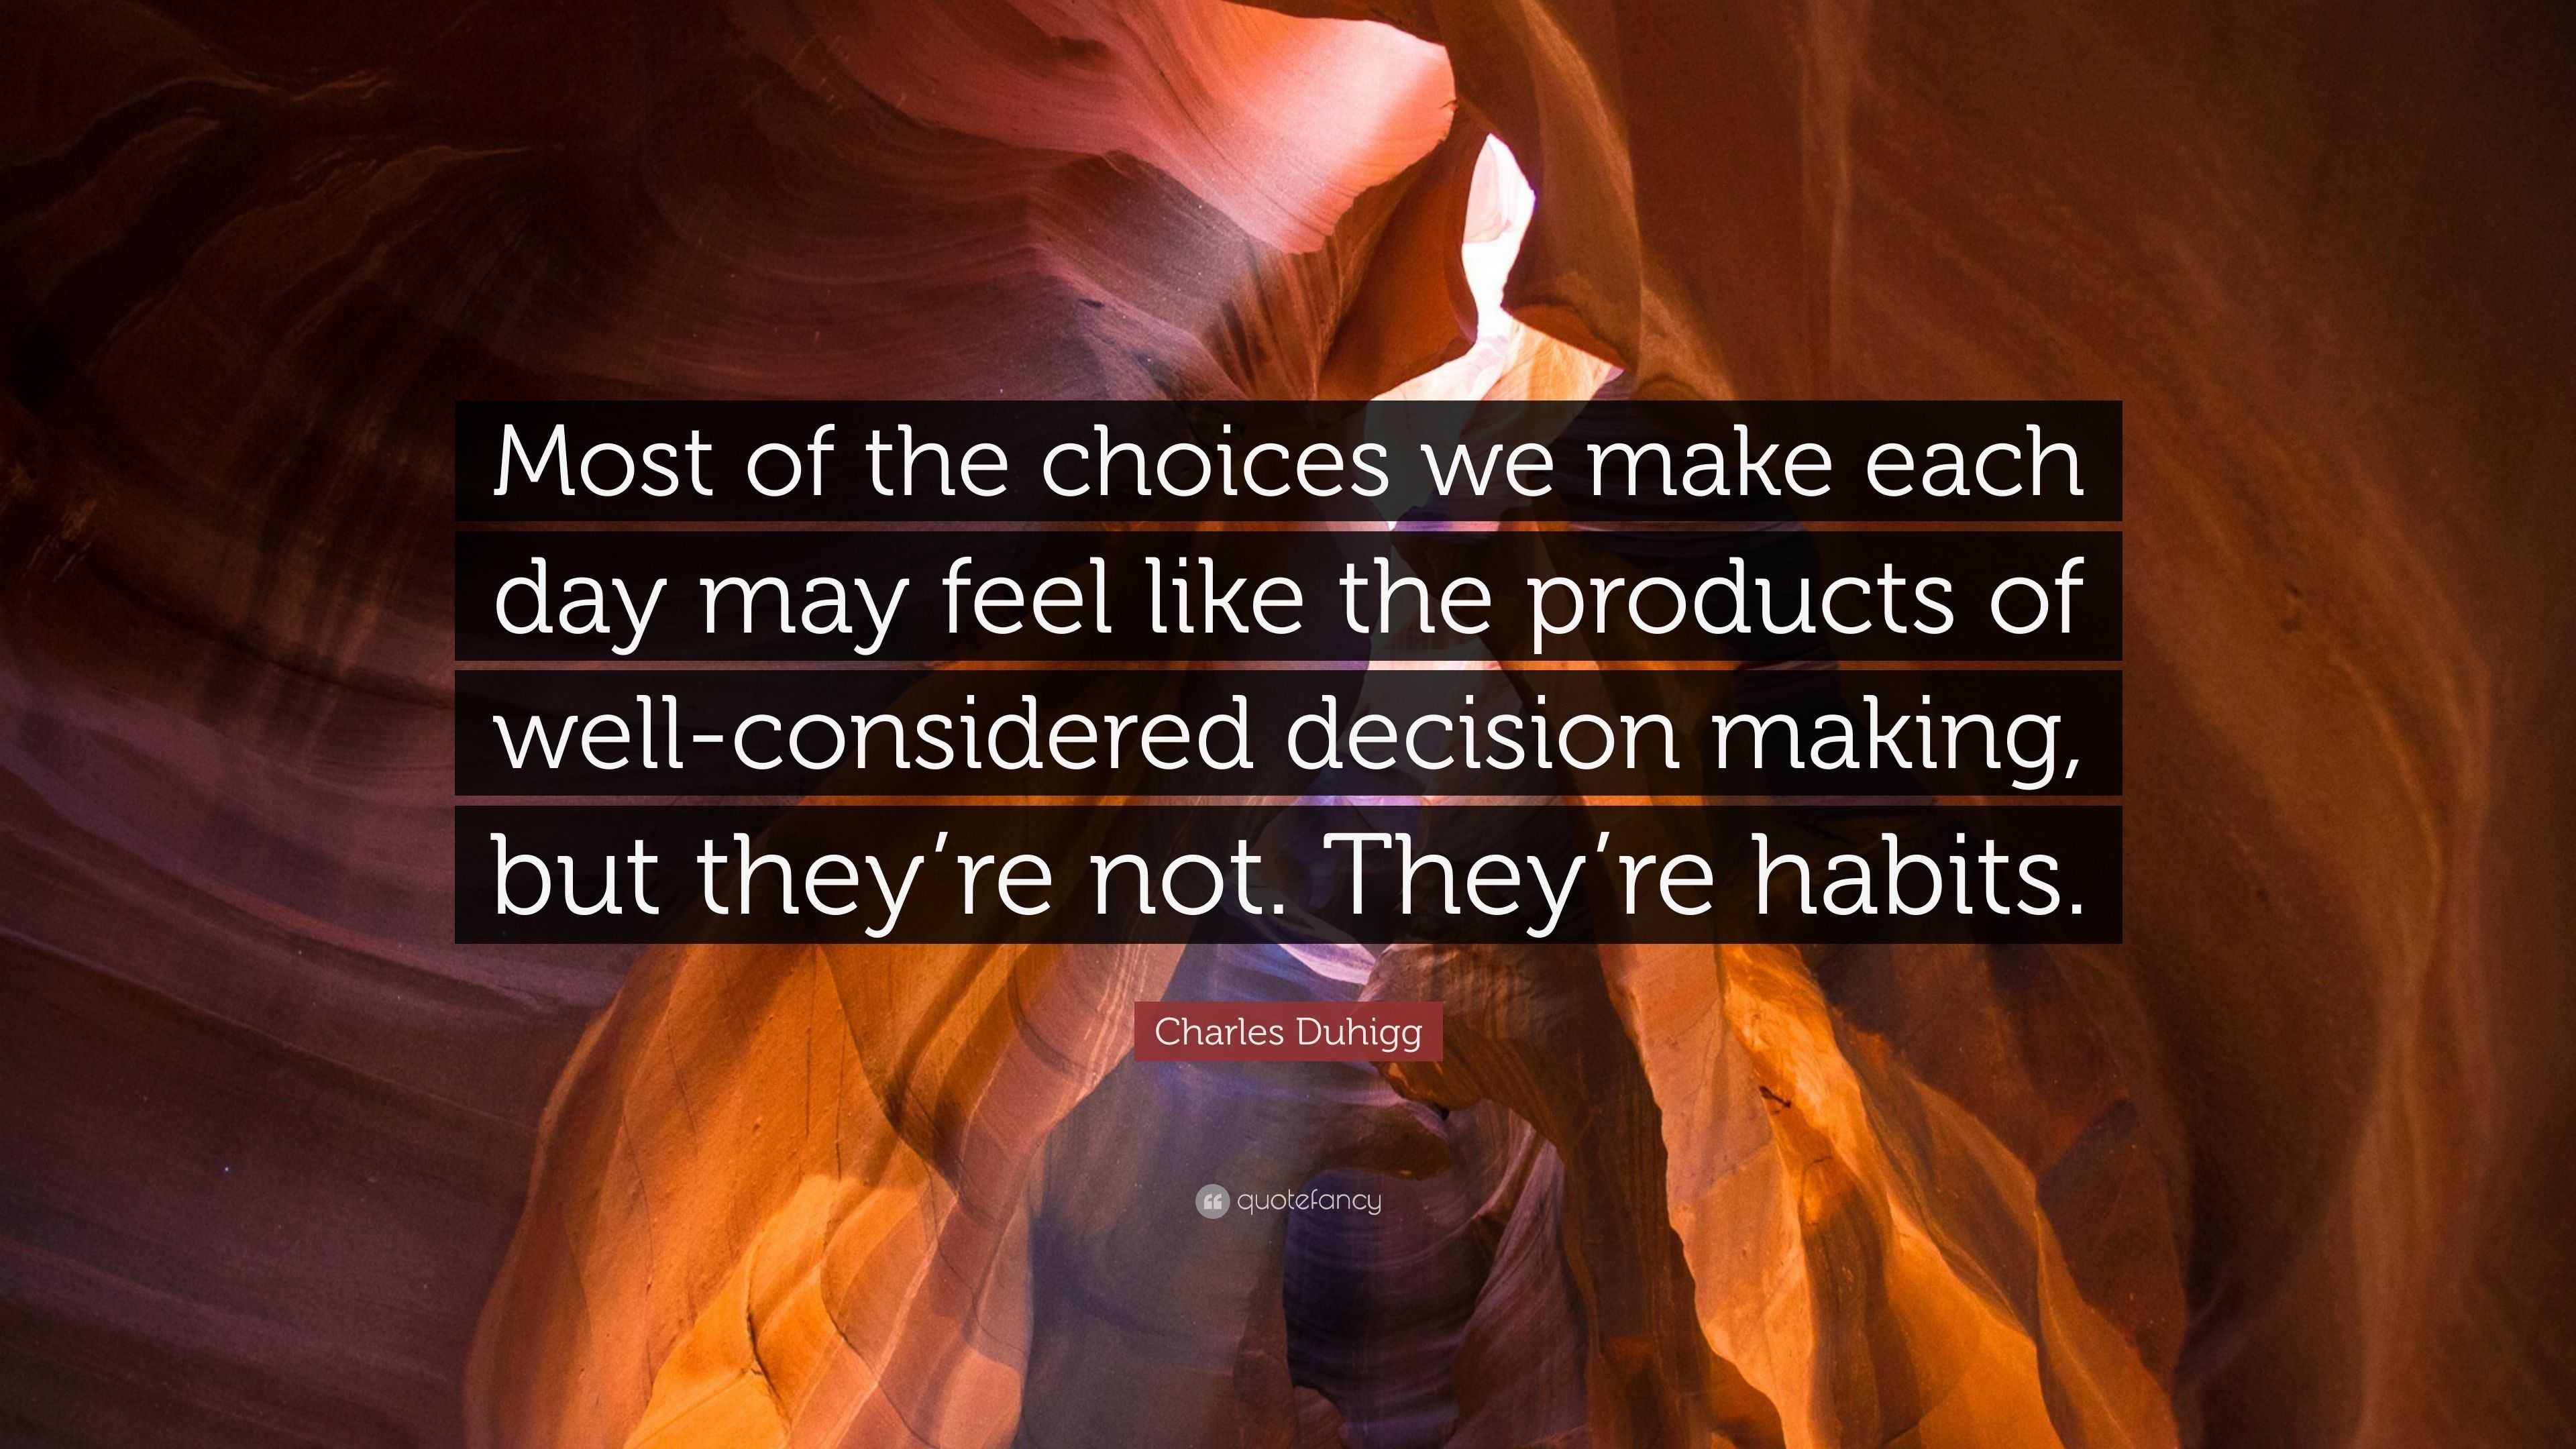 Charles Duhigg Quote: “Most of the choices we make each day may feel